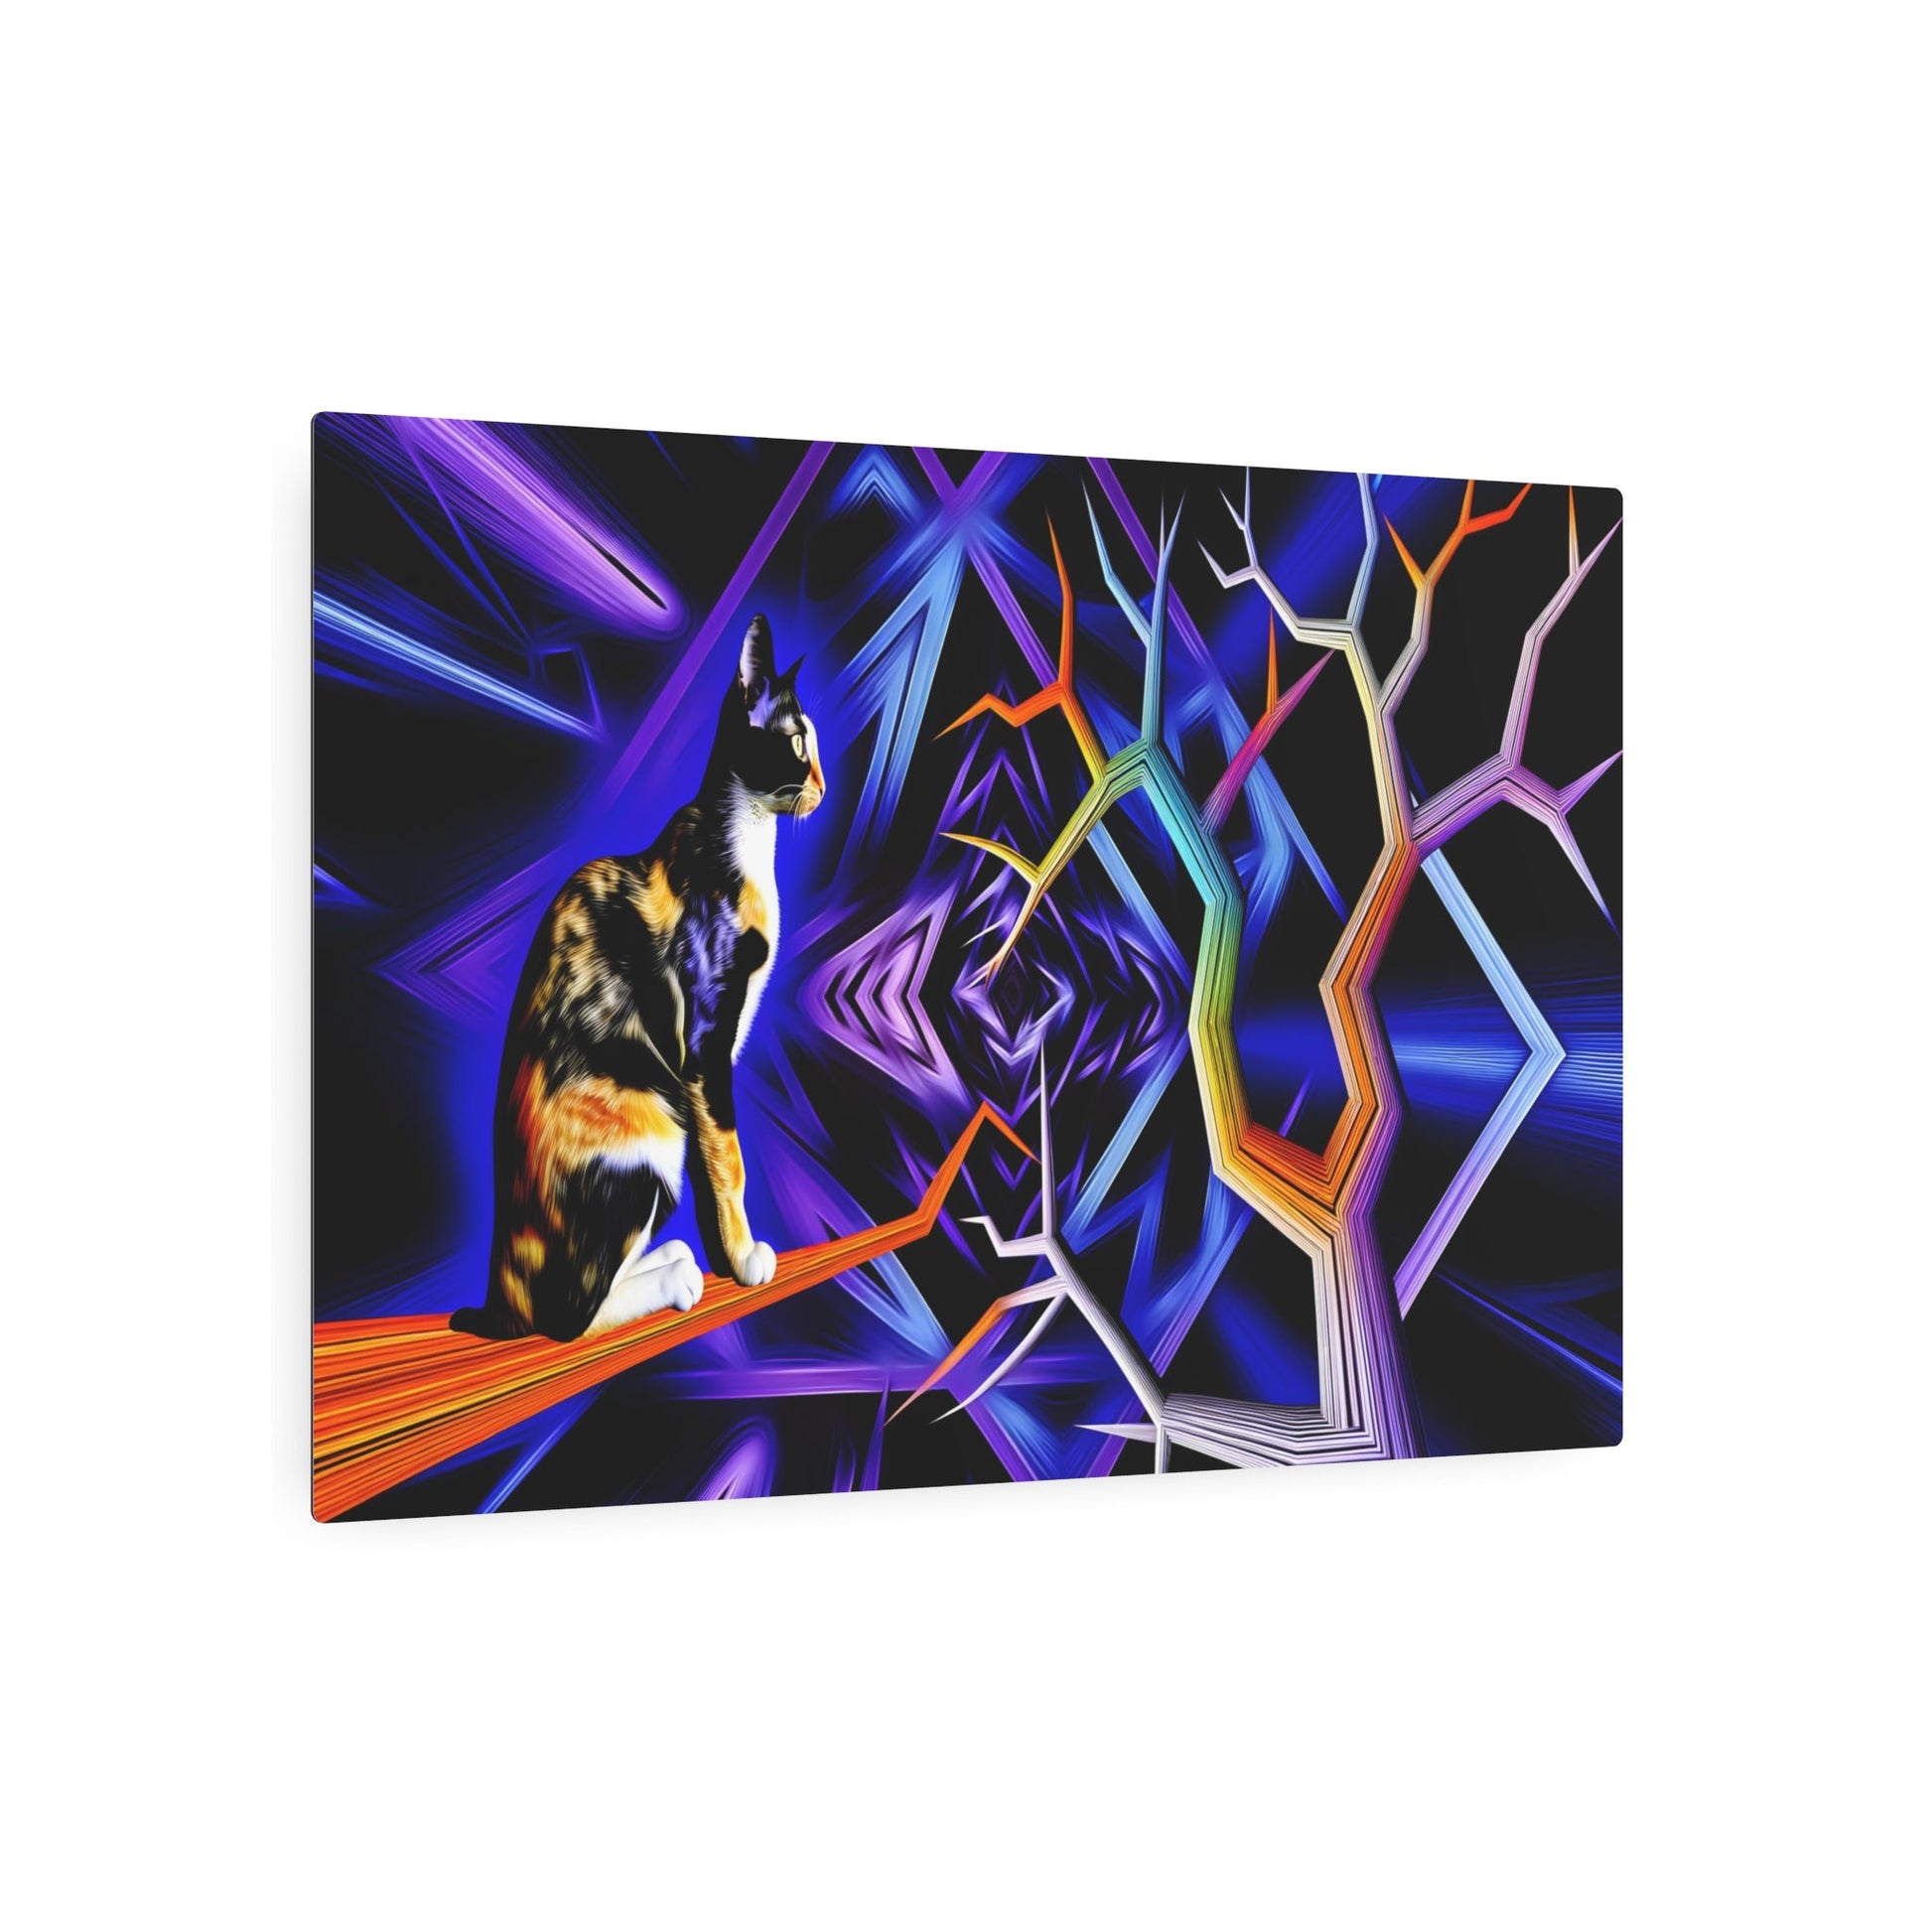 Metal Poster Art | "Modern Cyberpunk Calico Cat on Abstract Tree Branch Digital Art - Contemporary Neon Colored Wall Decor" - Metal Poster Art 36″ x 24″ (Horizontal) 0.12''